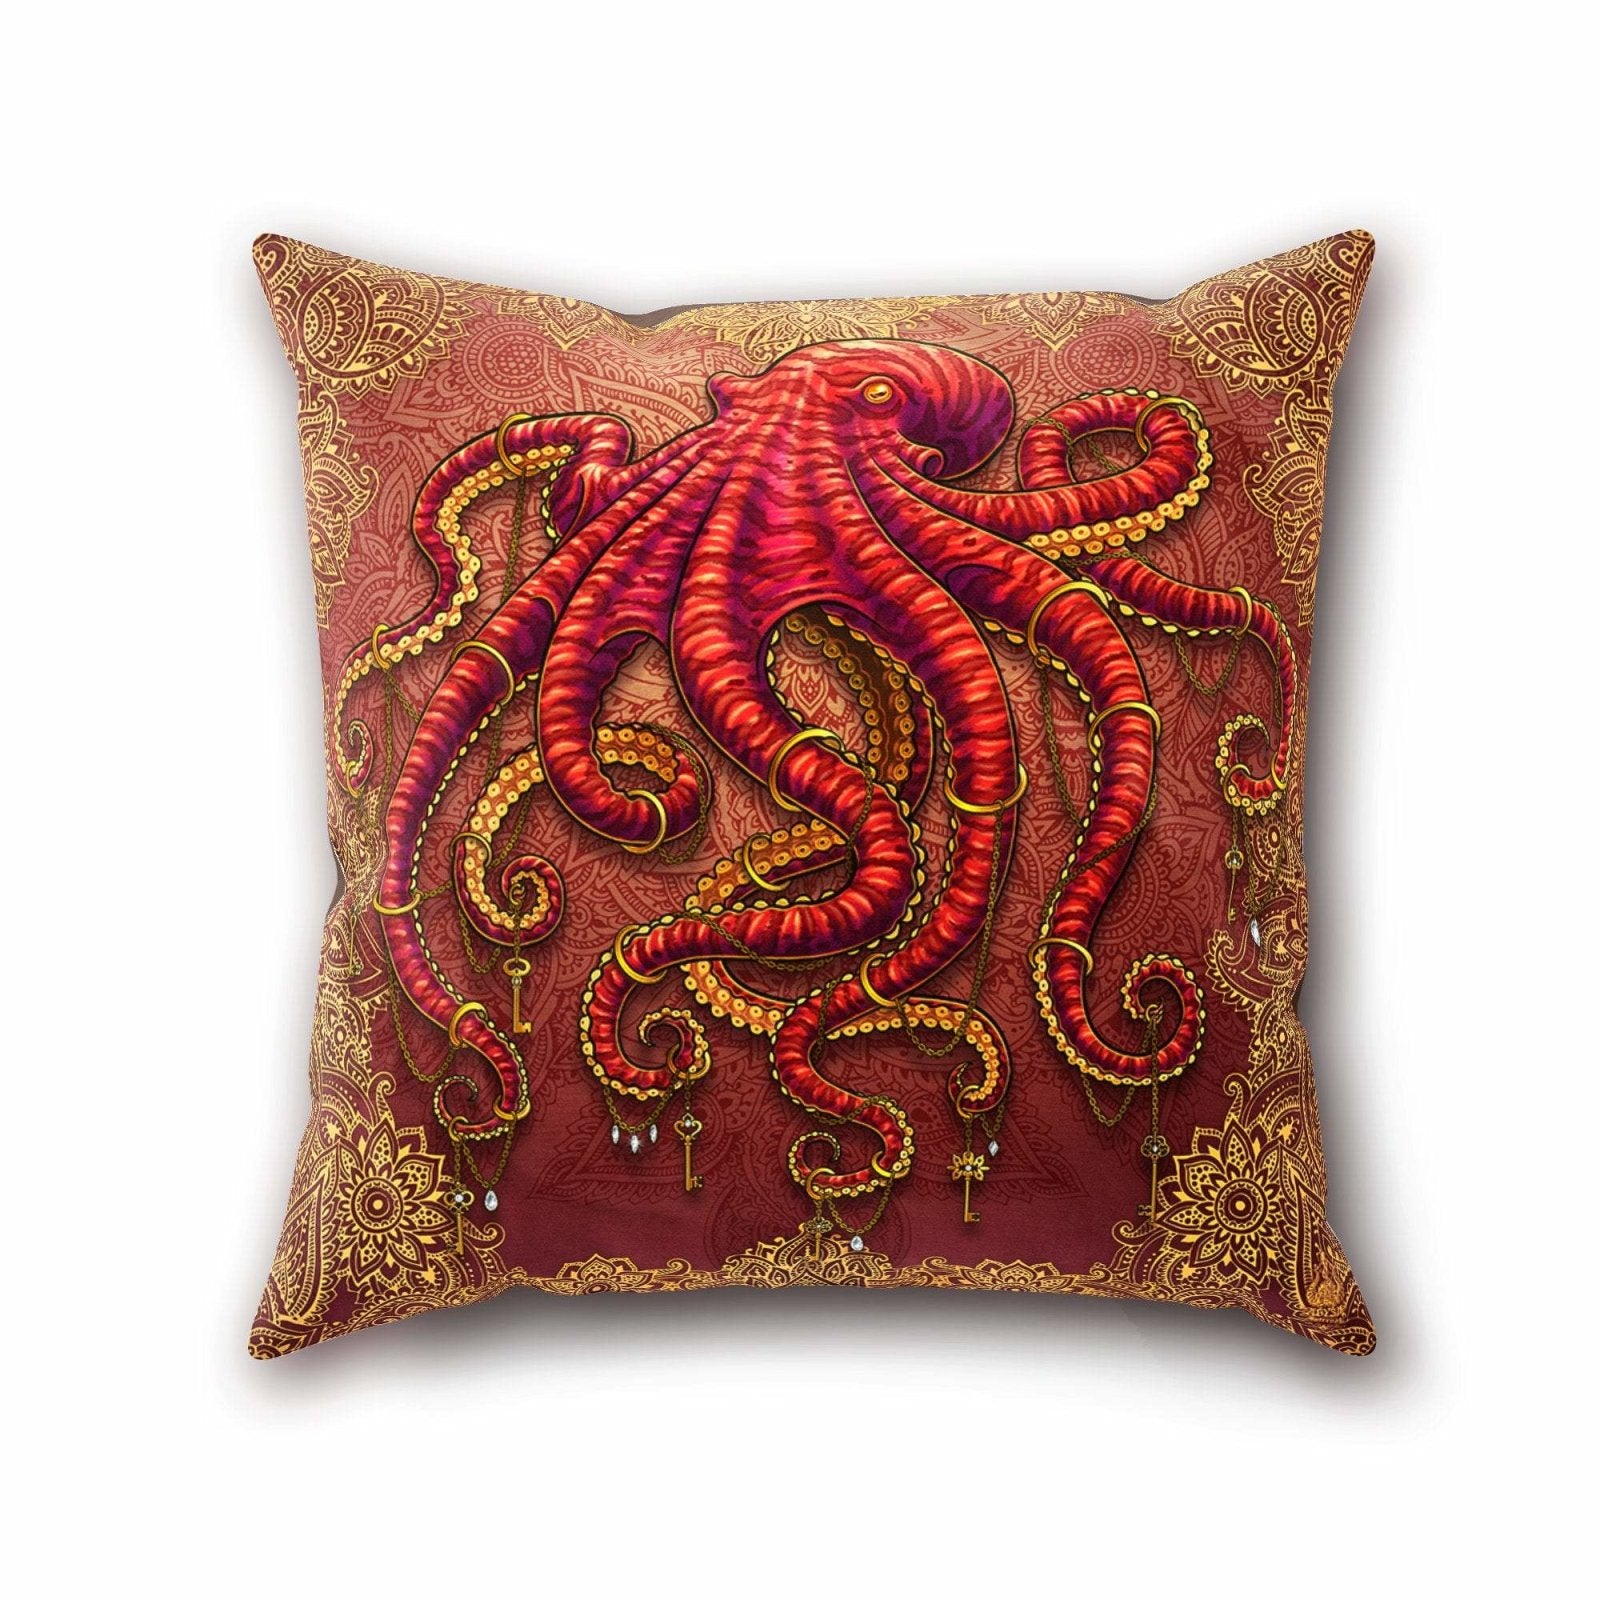 Boho Throw Pillow, Decorative Accent Cushion, Beach Room Decor, Indie and Eclectic Design, Funky Home - Octopus and Mandalas - Abysm Internal